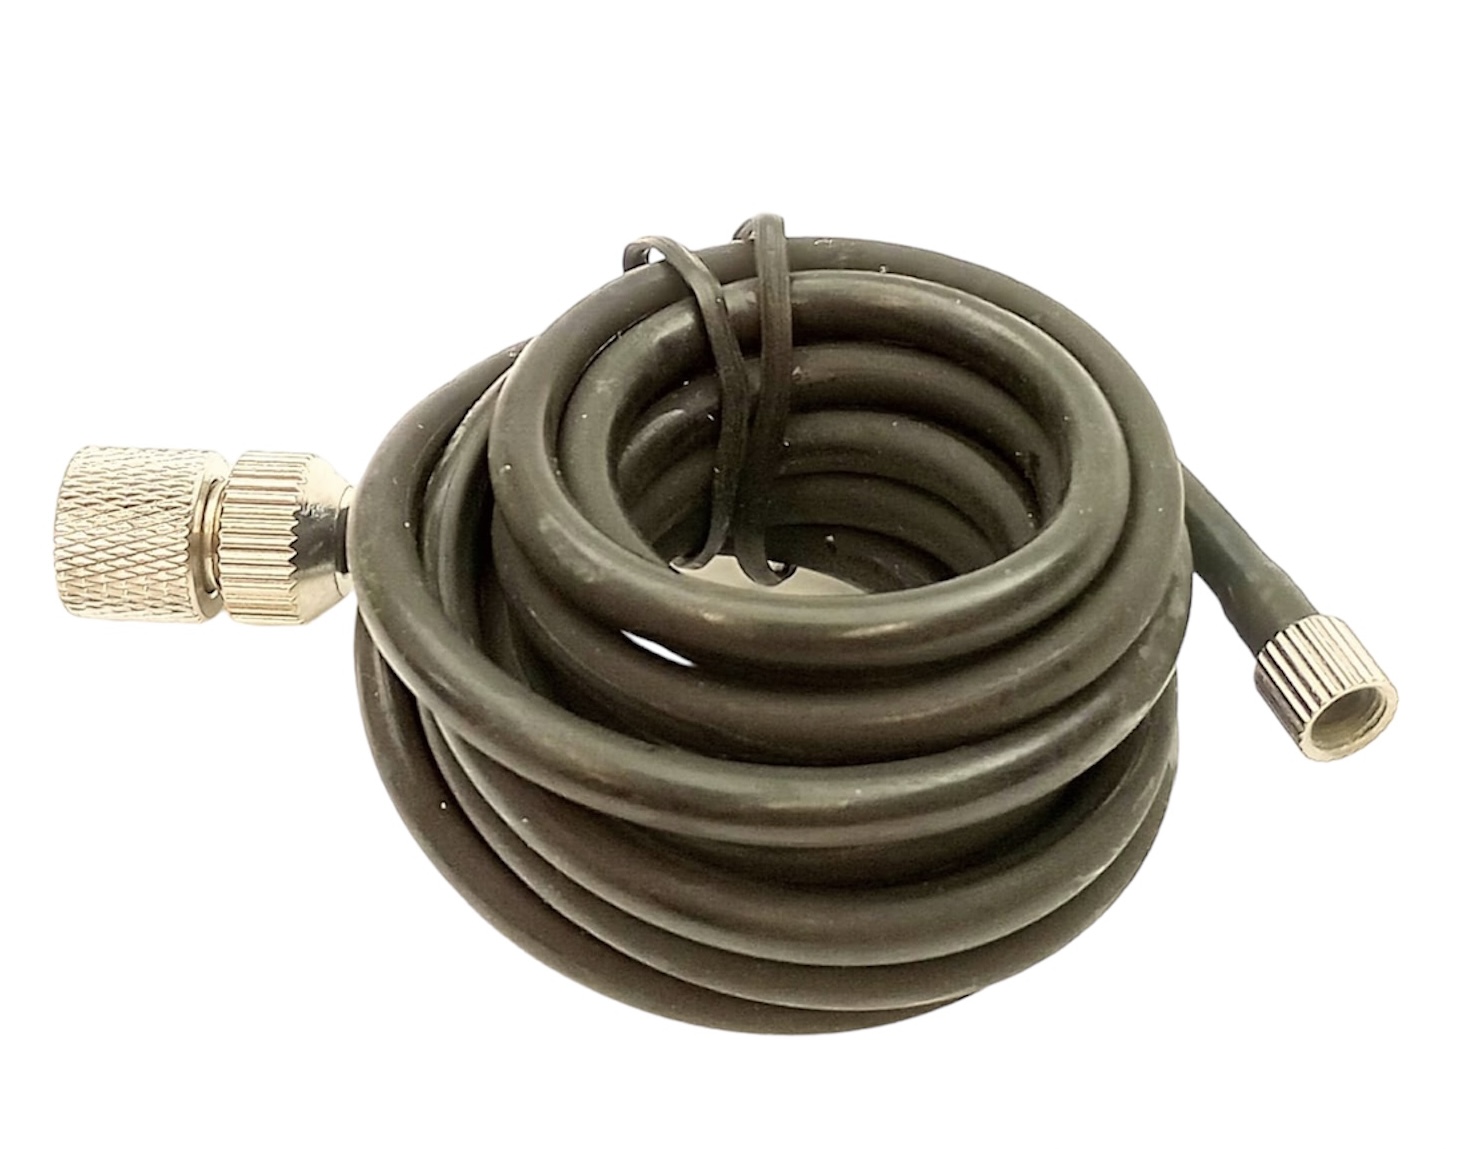 BA003 Vinyl Air Hose Set for Expo Airbrushes